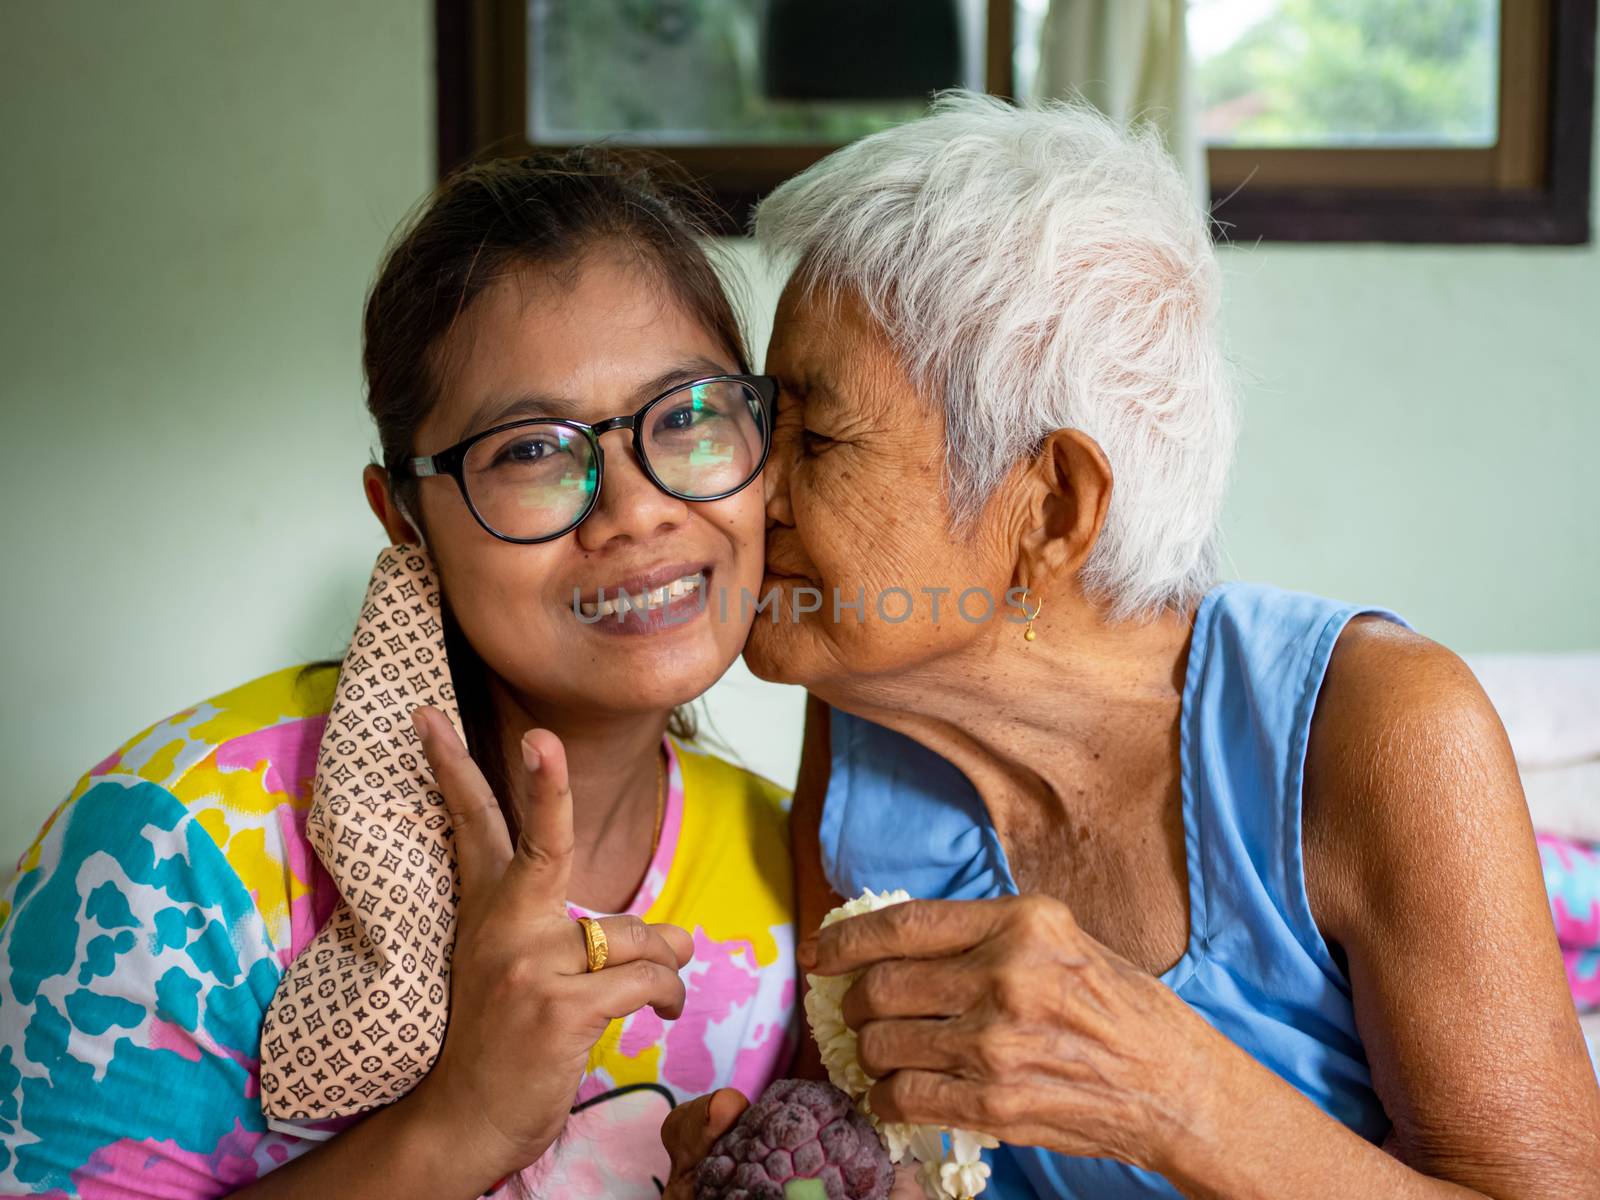 chachangsao,thailand. 8/12/2020. The image of the old woman on the cheek grandchild. real bodies concept. by Unimages2527